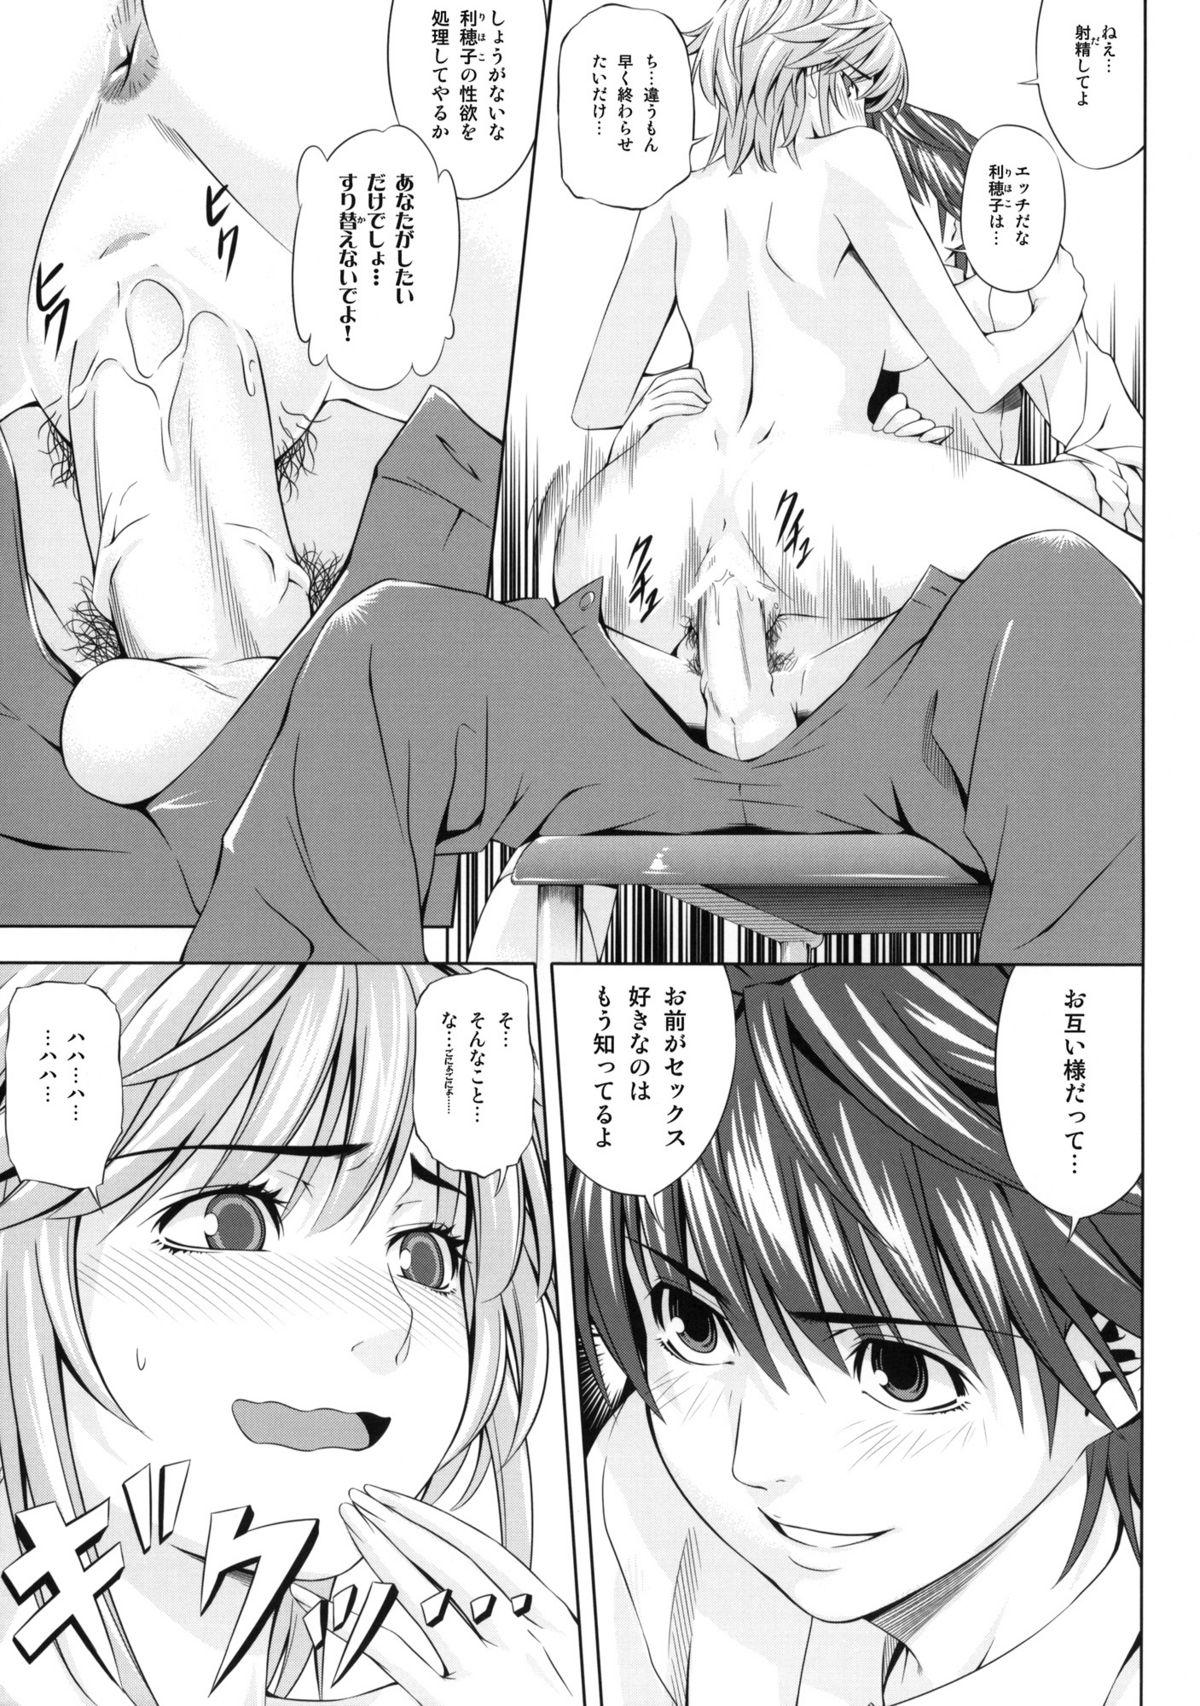 Culito H2 AMA×2 AFTER - Amagami Outside - Page 6